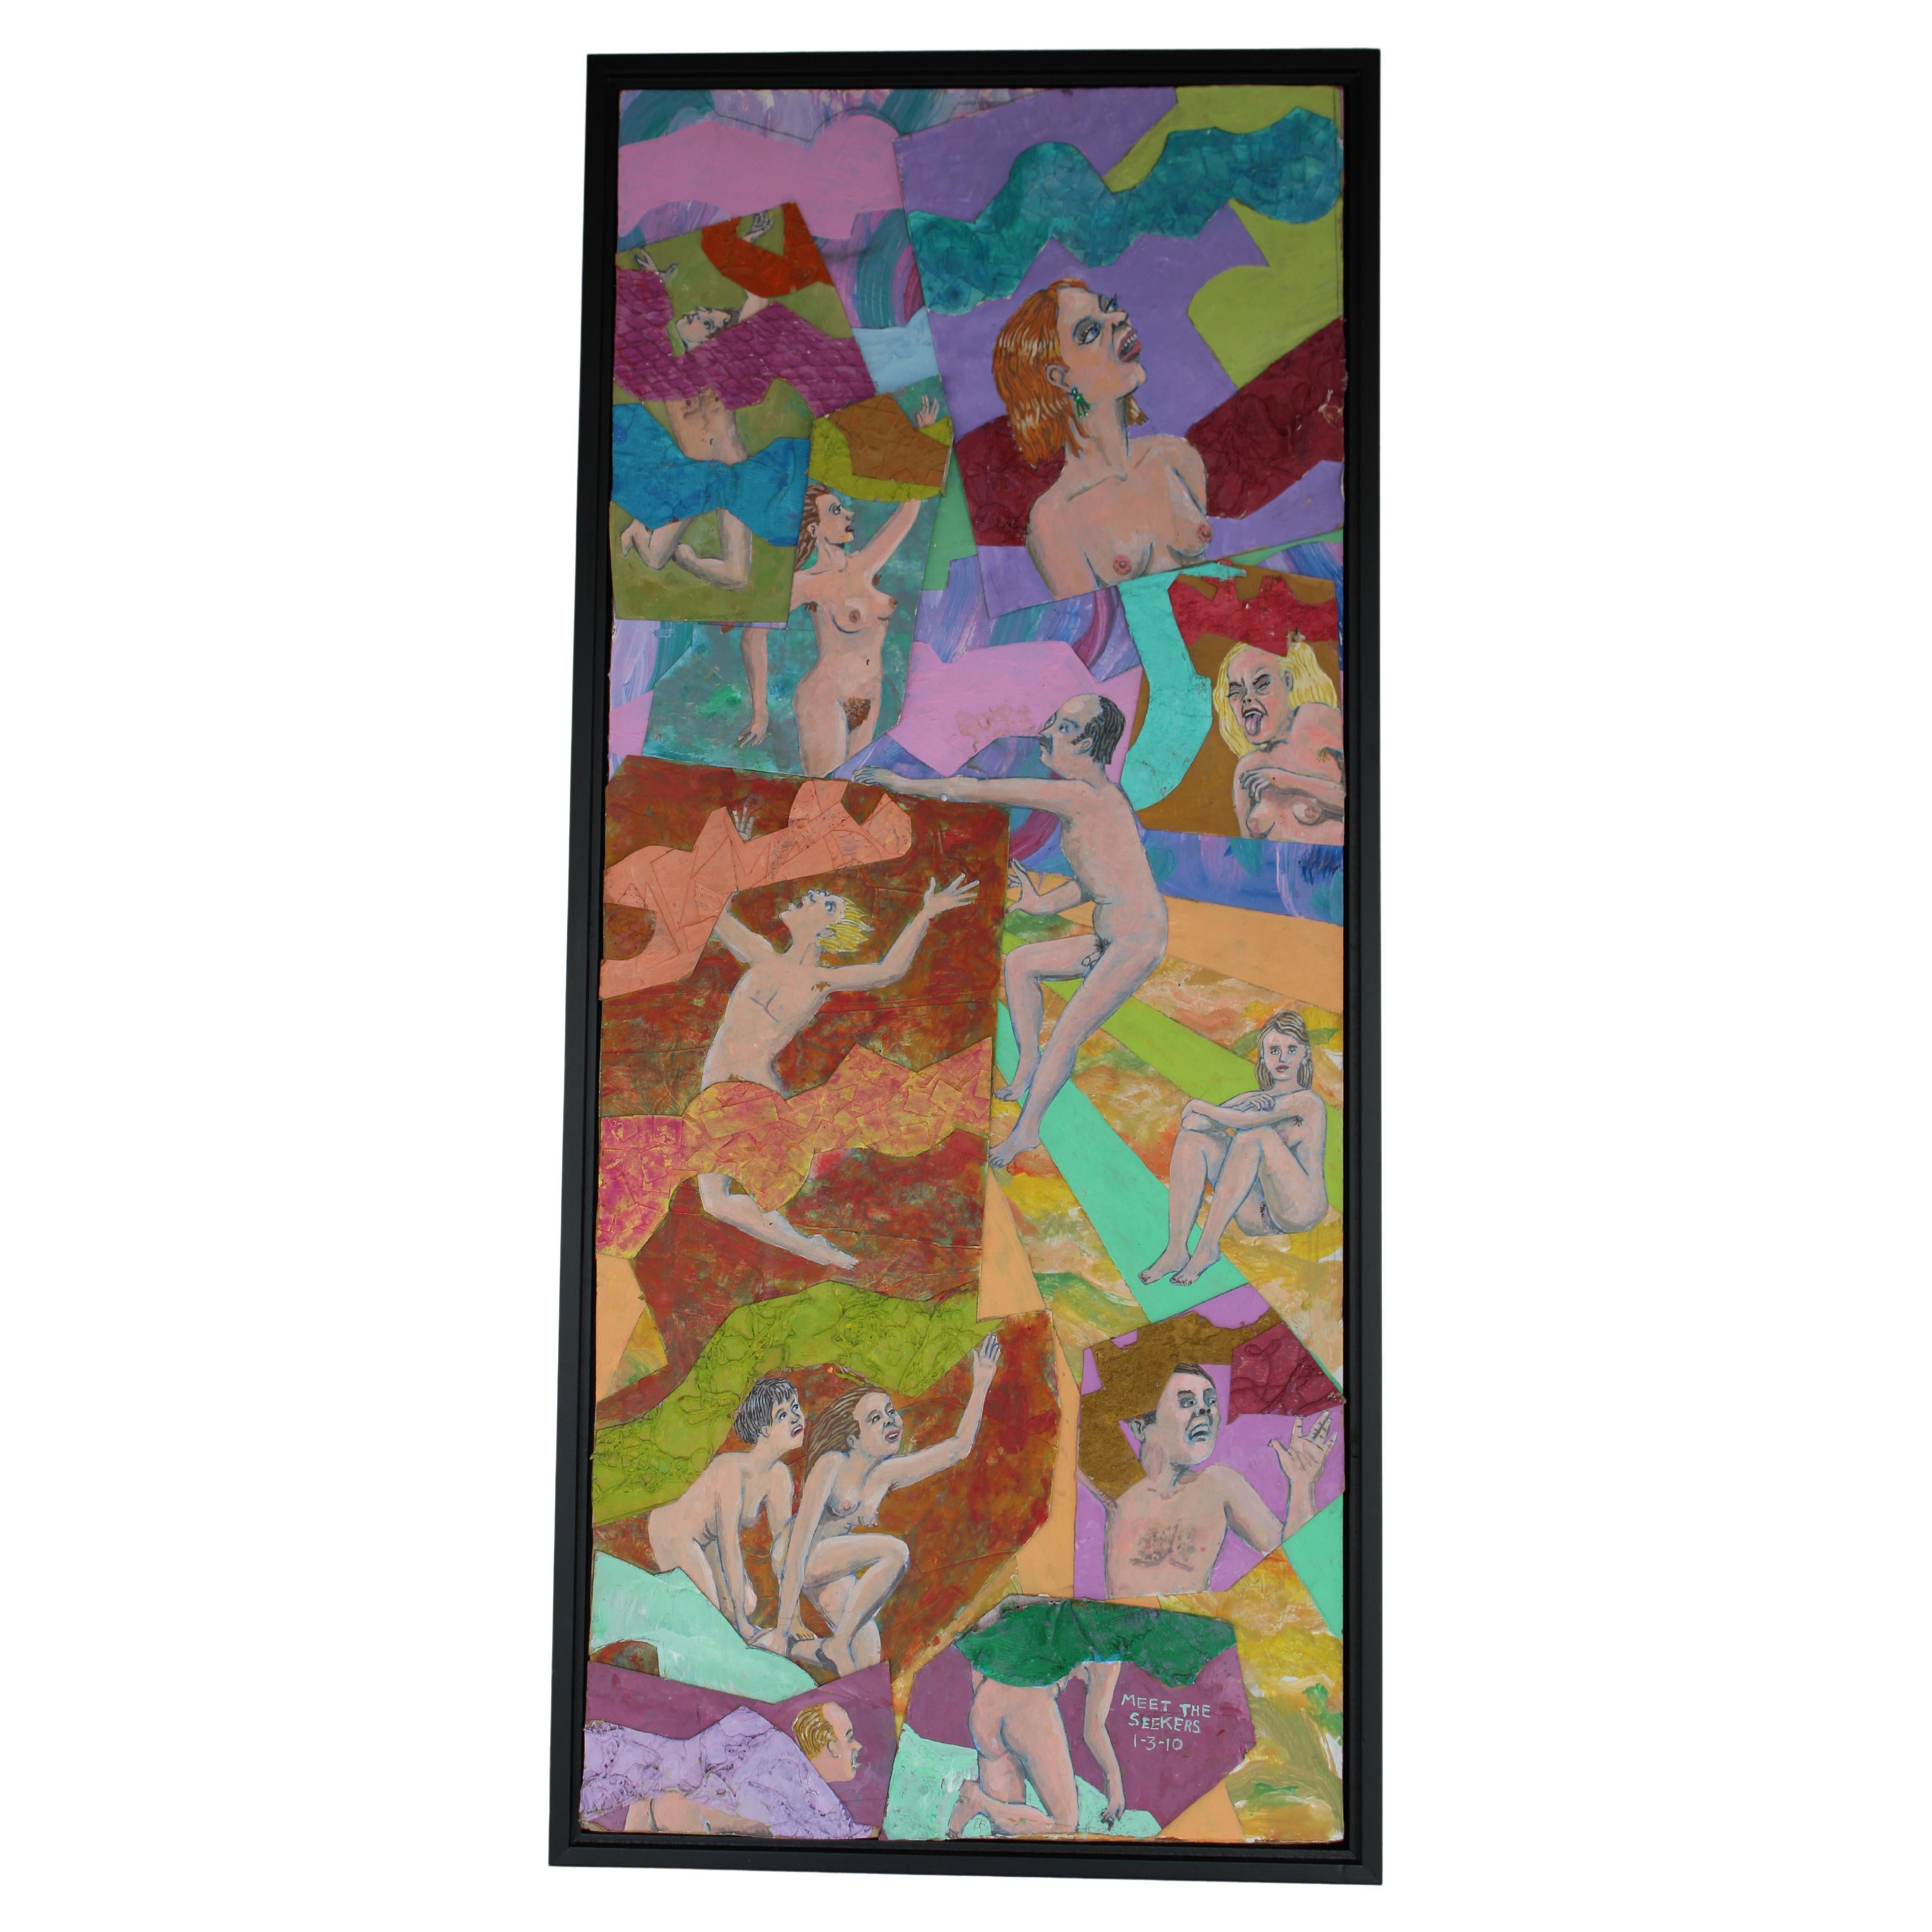 Outsider Art Painting titled Meet The Seekers, 1-3-10 For Sale